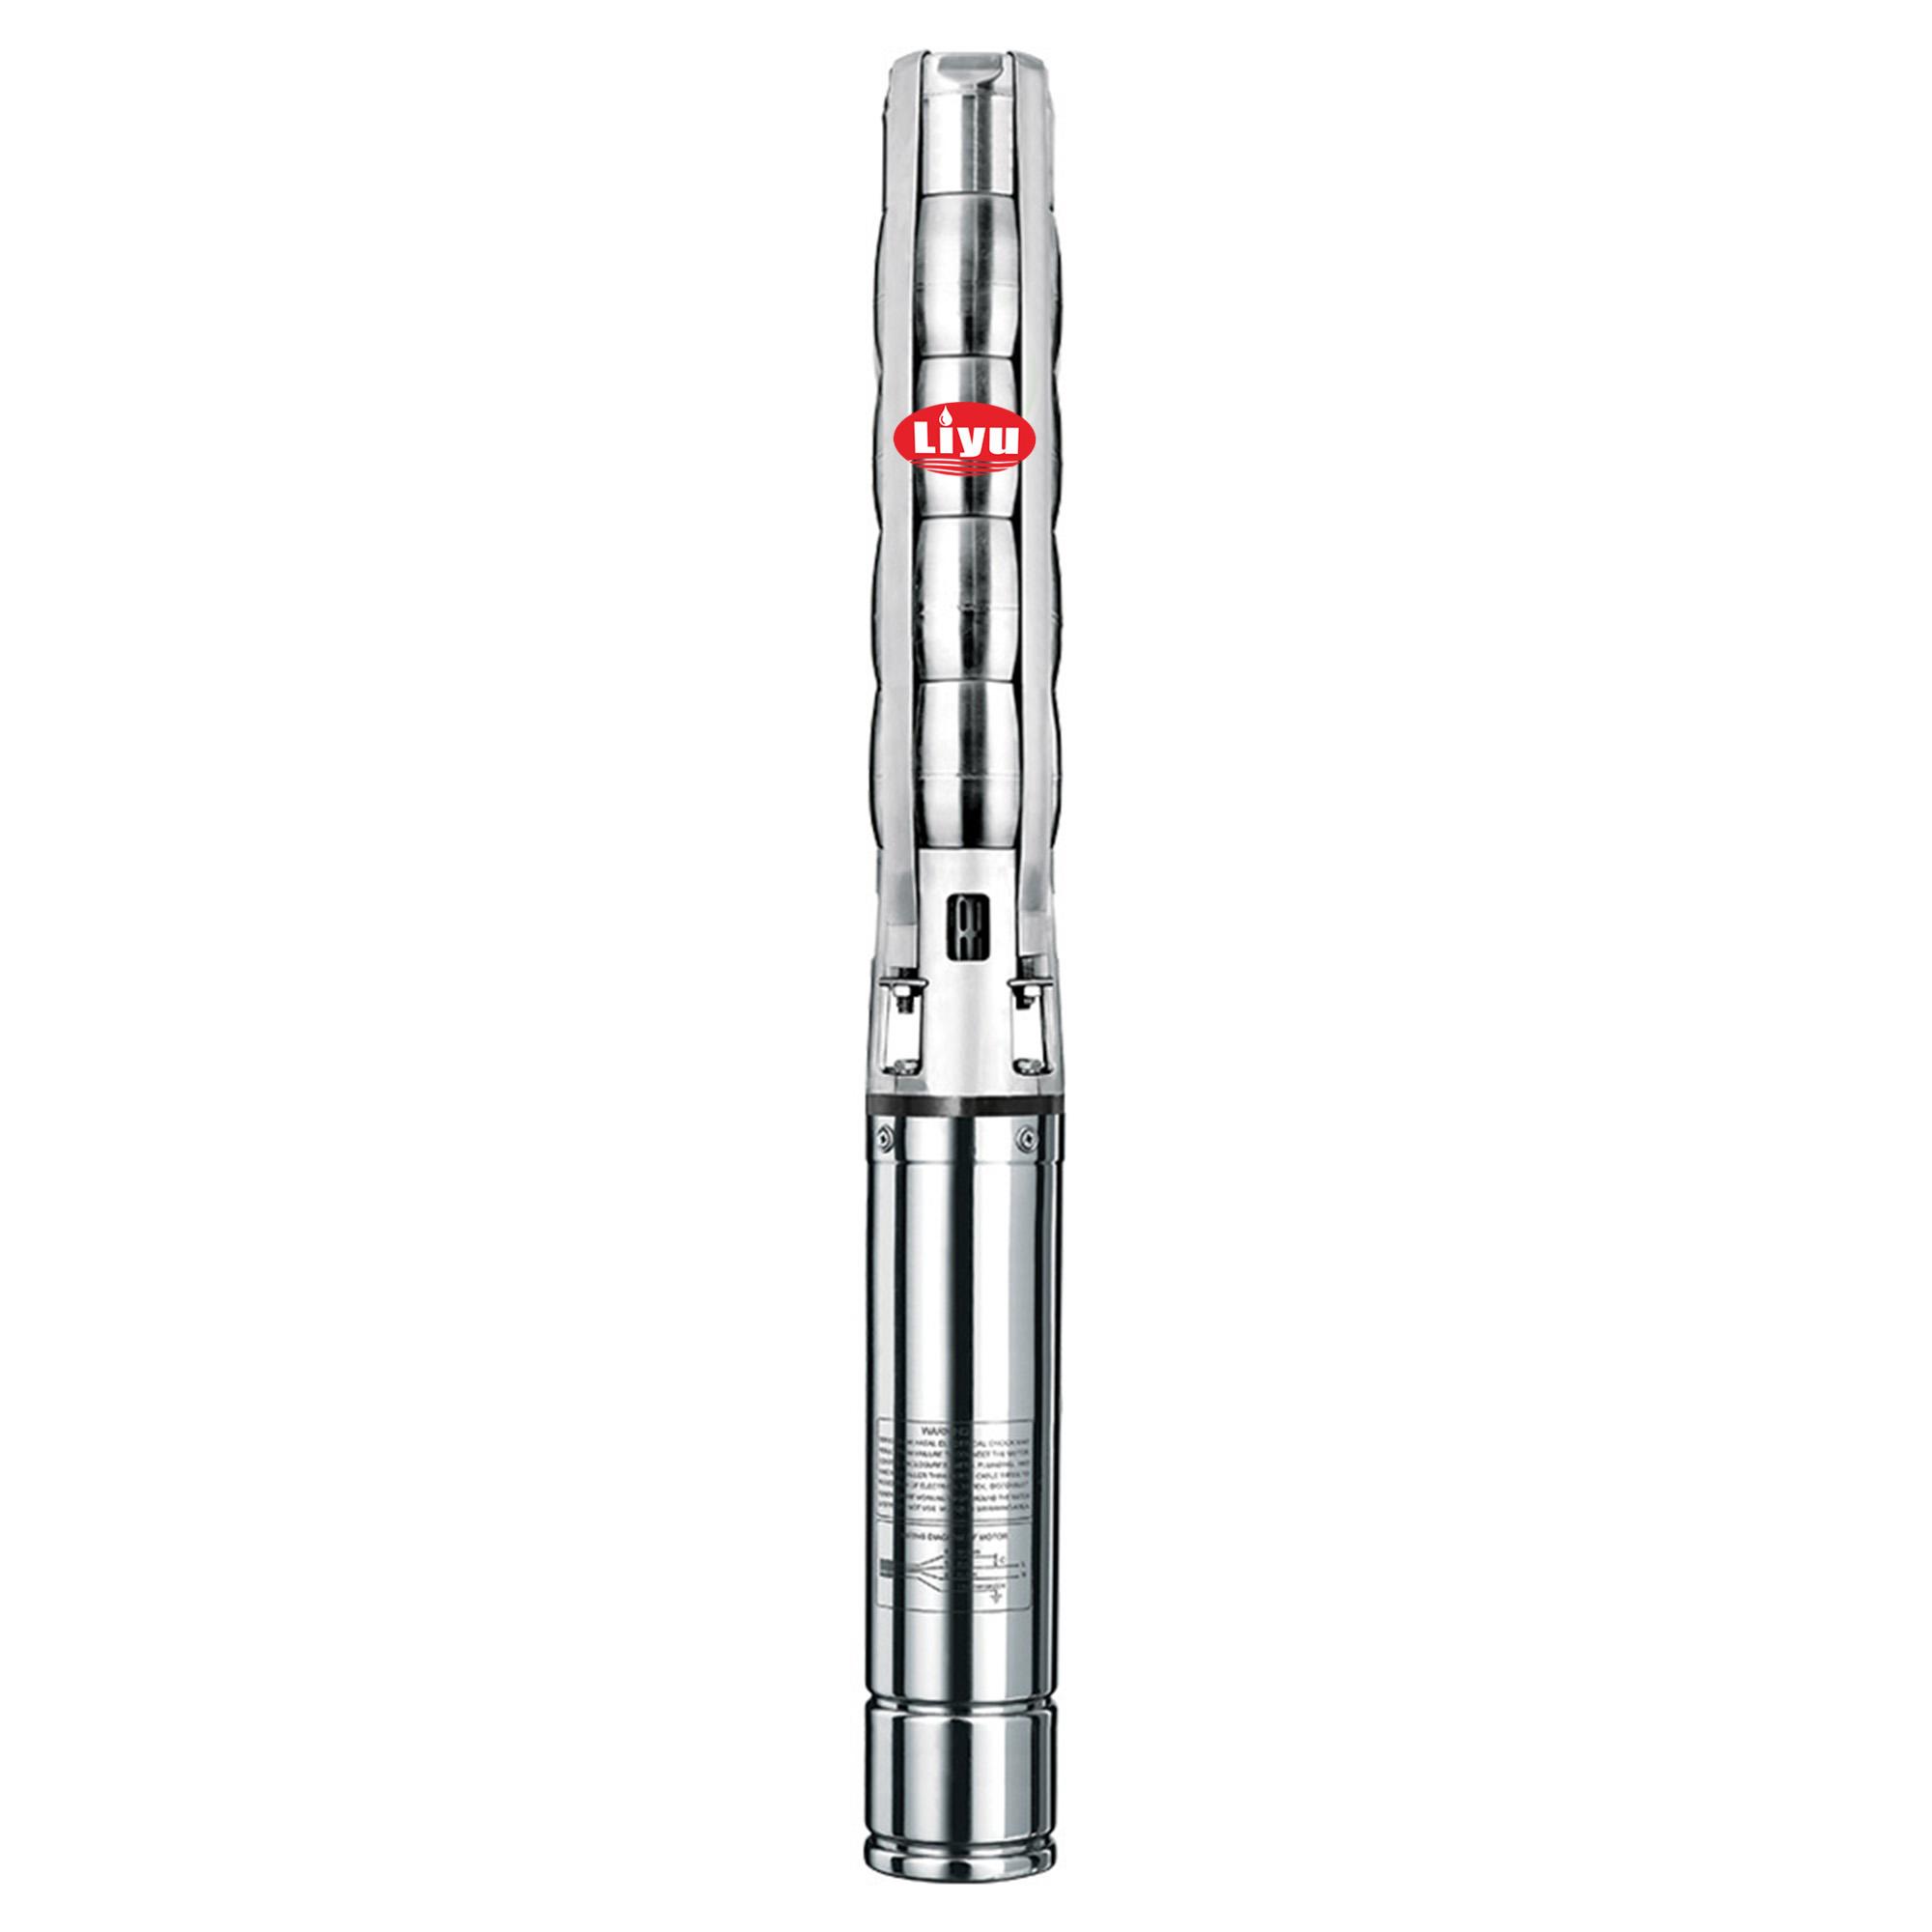 6SP 46 Stainless Steel Submersible Pump